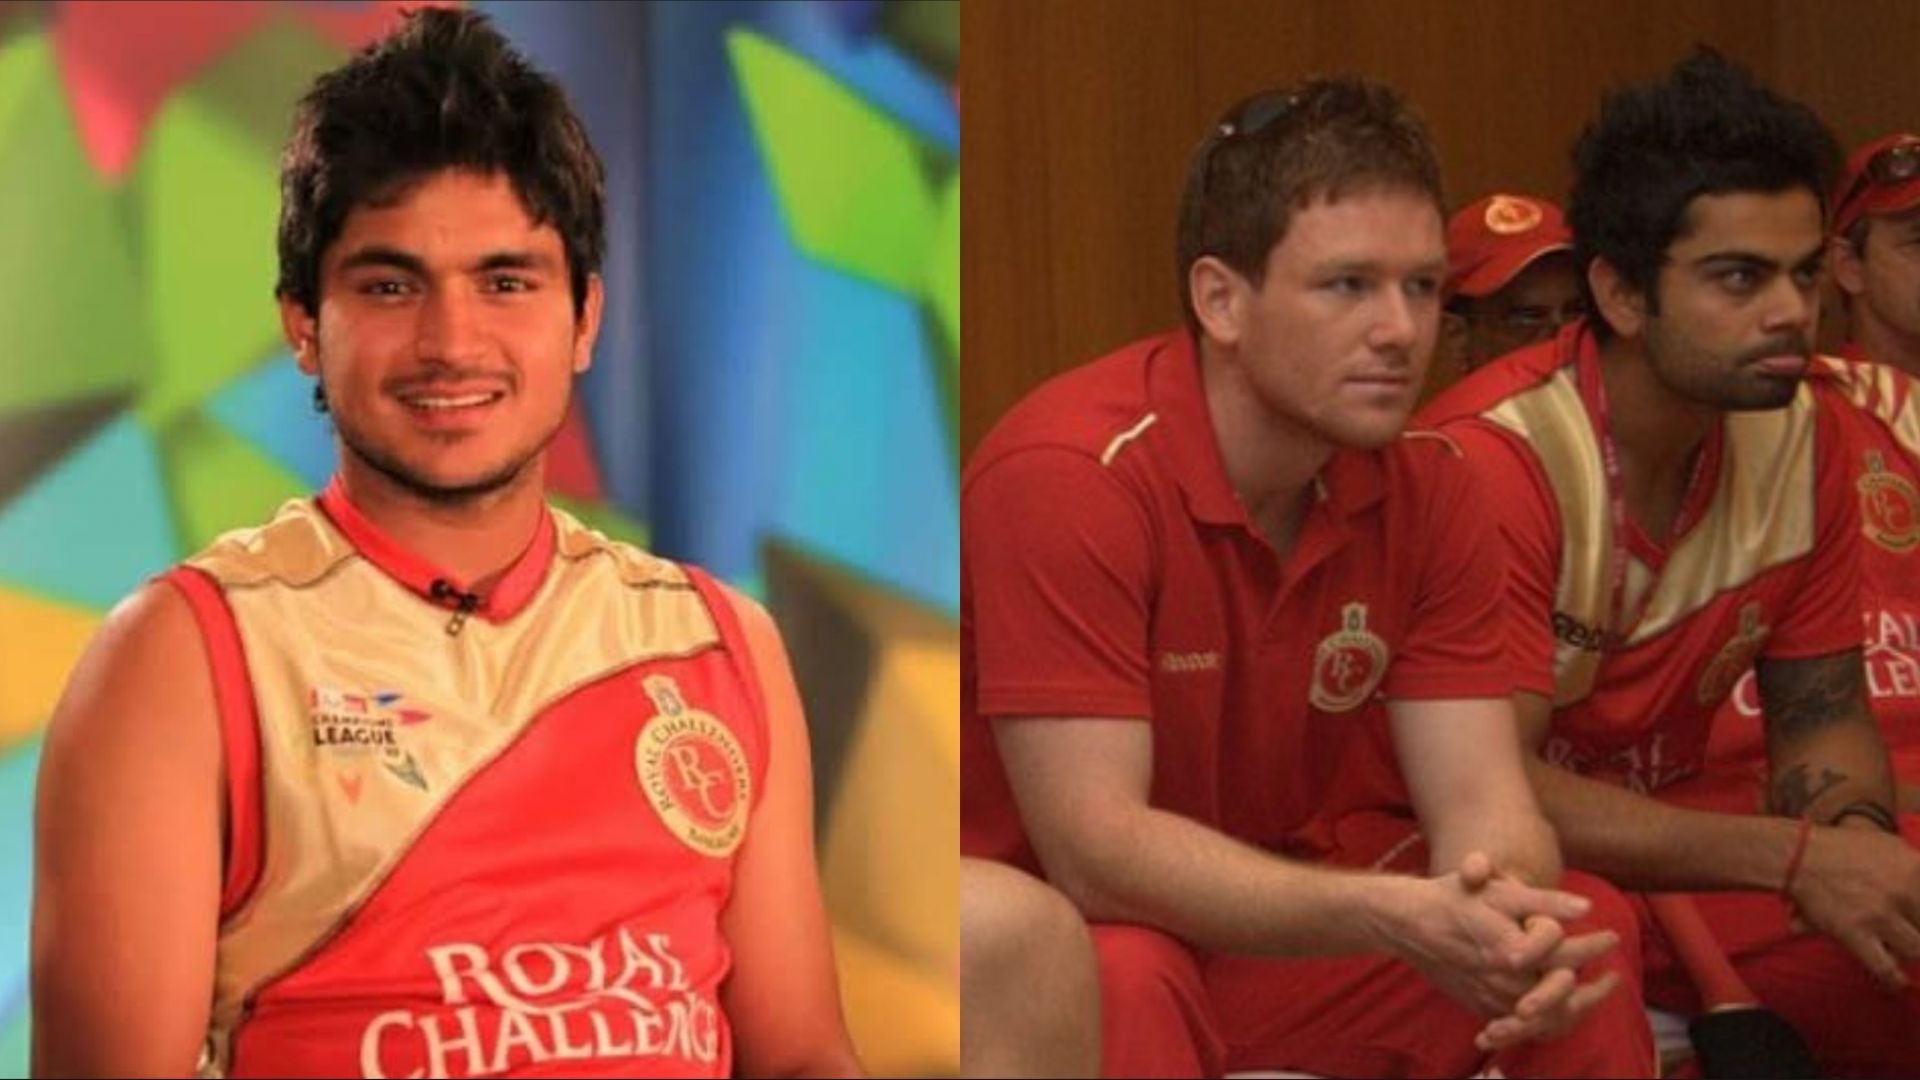 Manish Pandey and Eoin Morgan once played for Royal Challengers Bangalore in the IPL